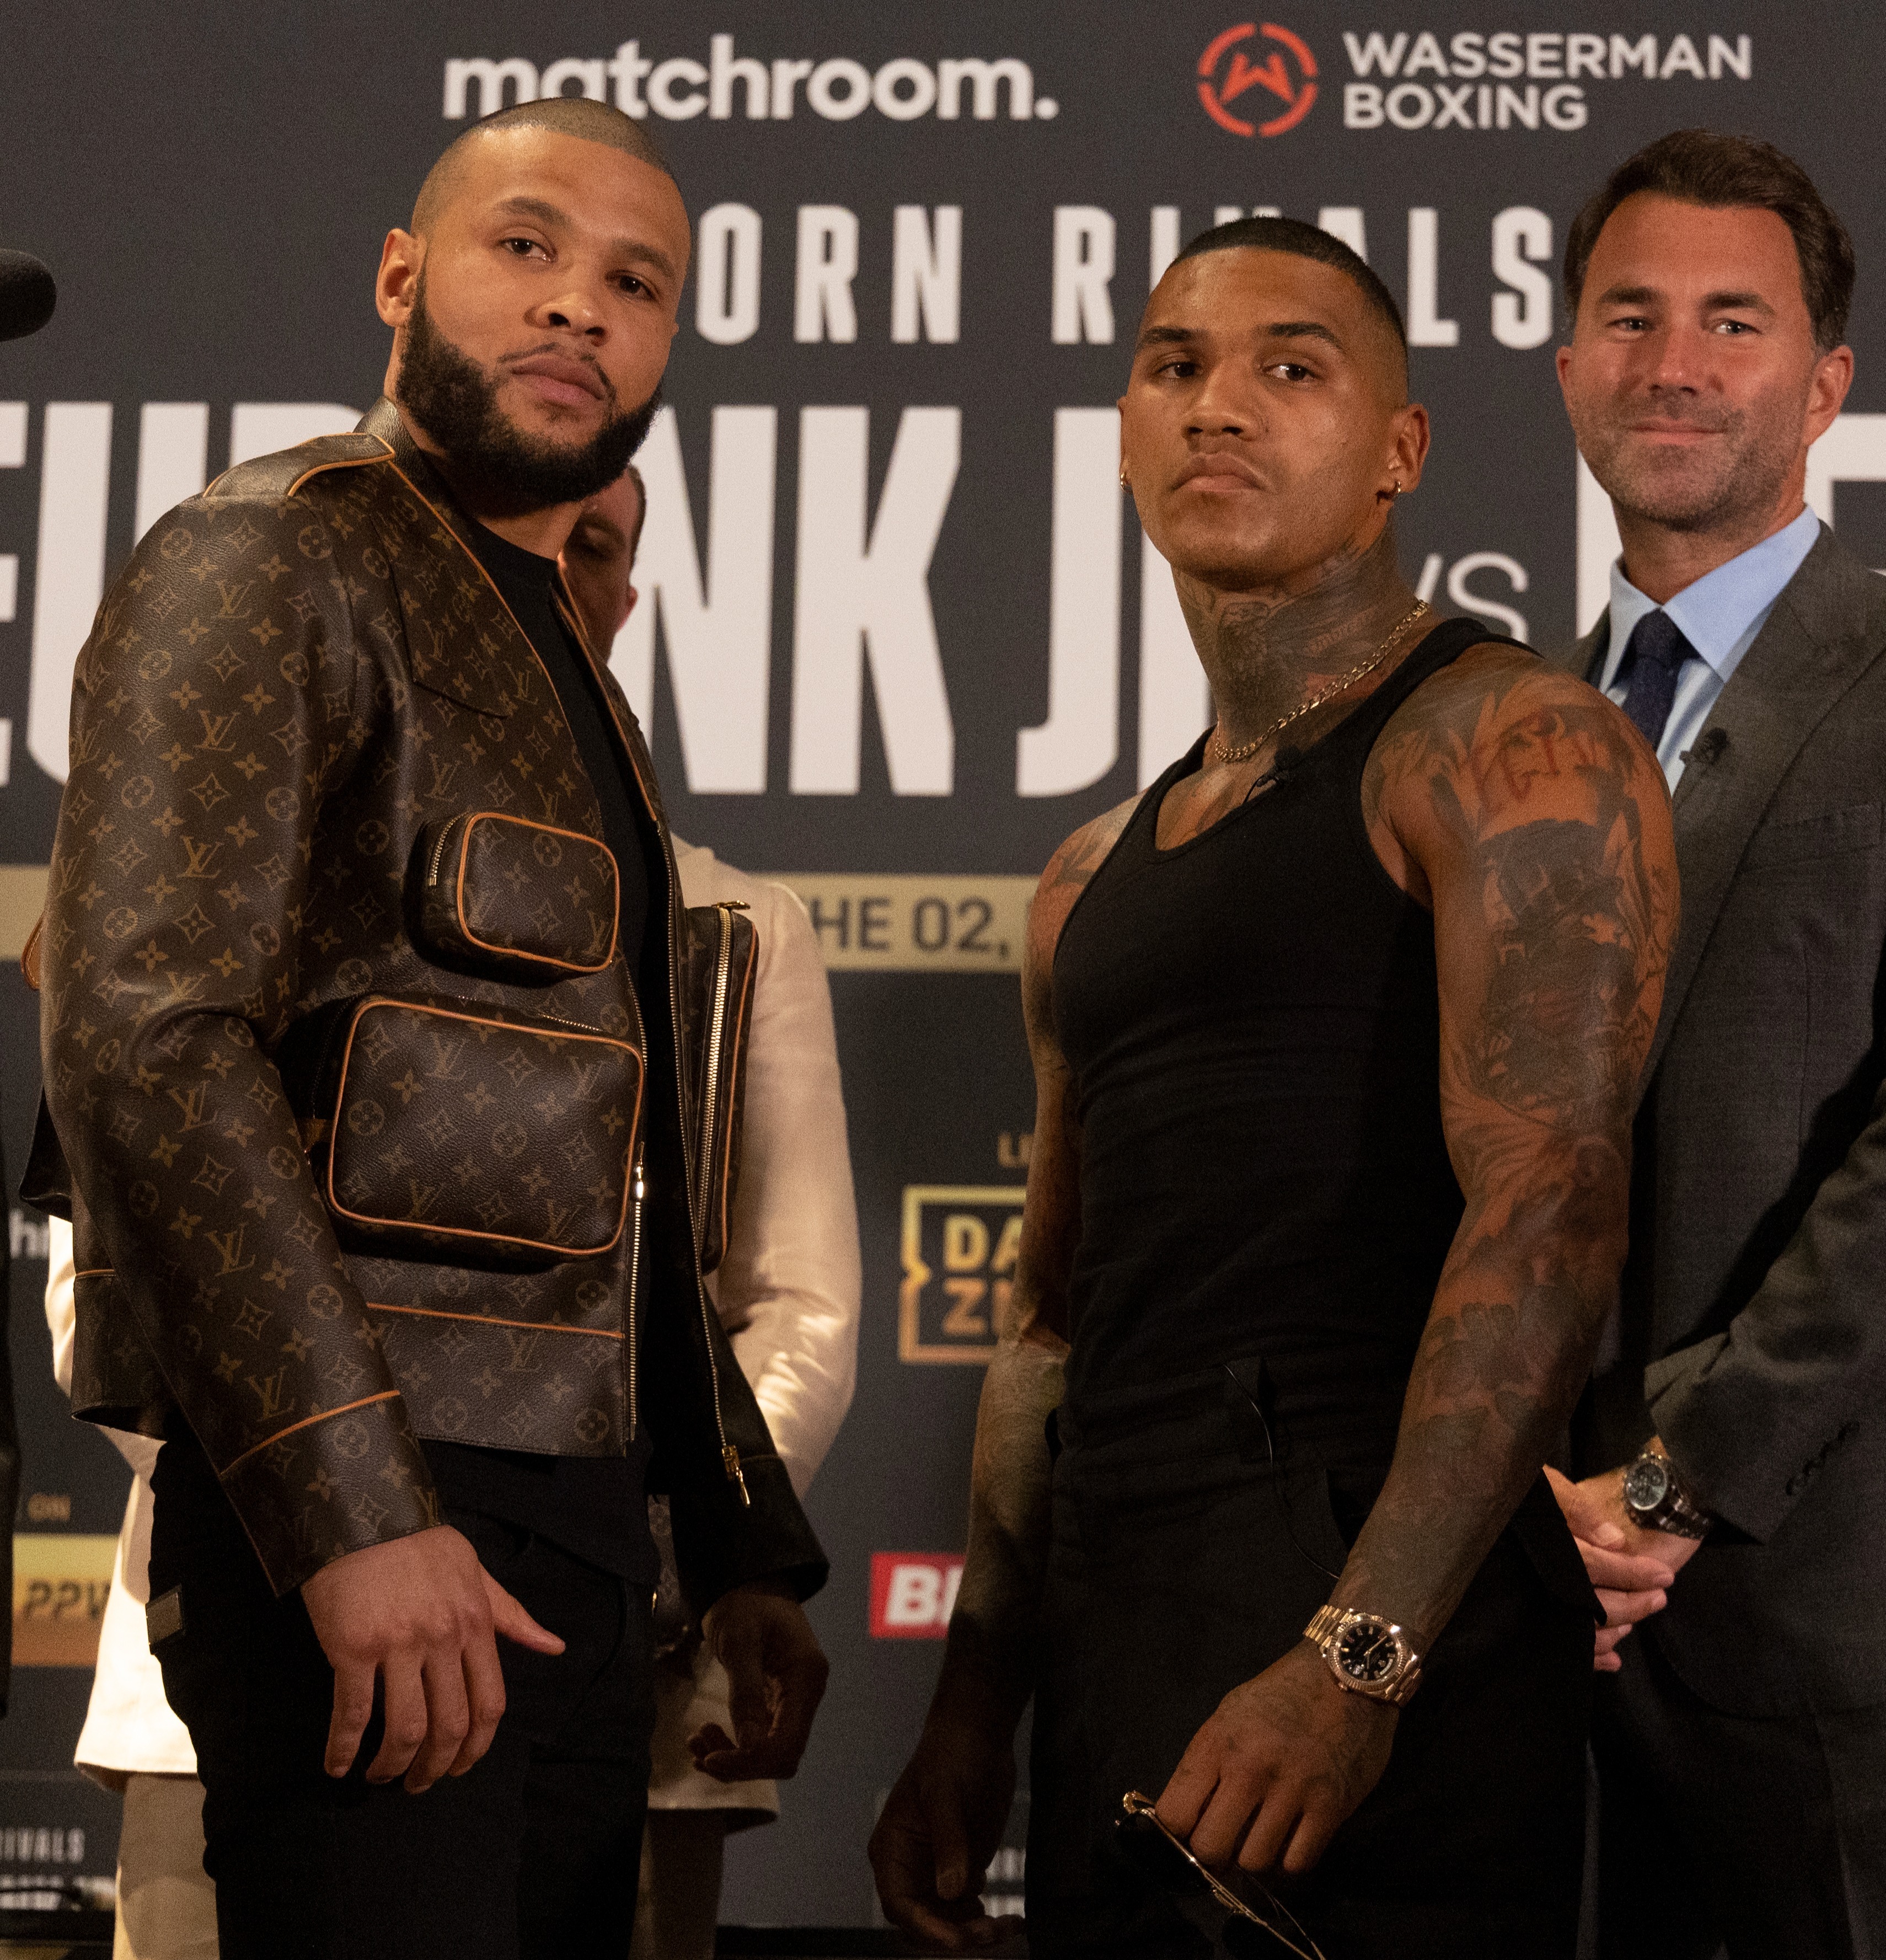 , Conor Benn tattoos – what do they say and what are their meanings ahead of his fight against Chris Eubank Jr?